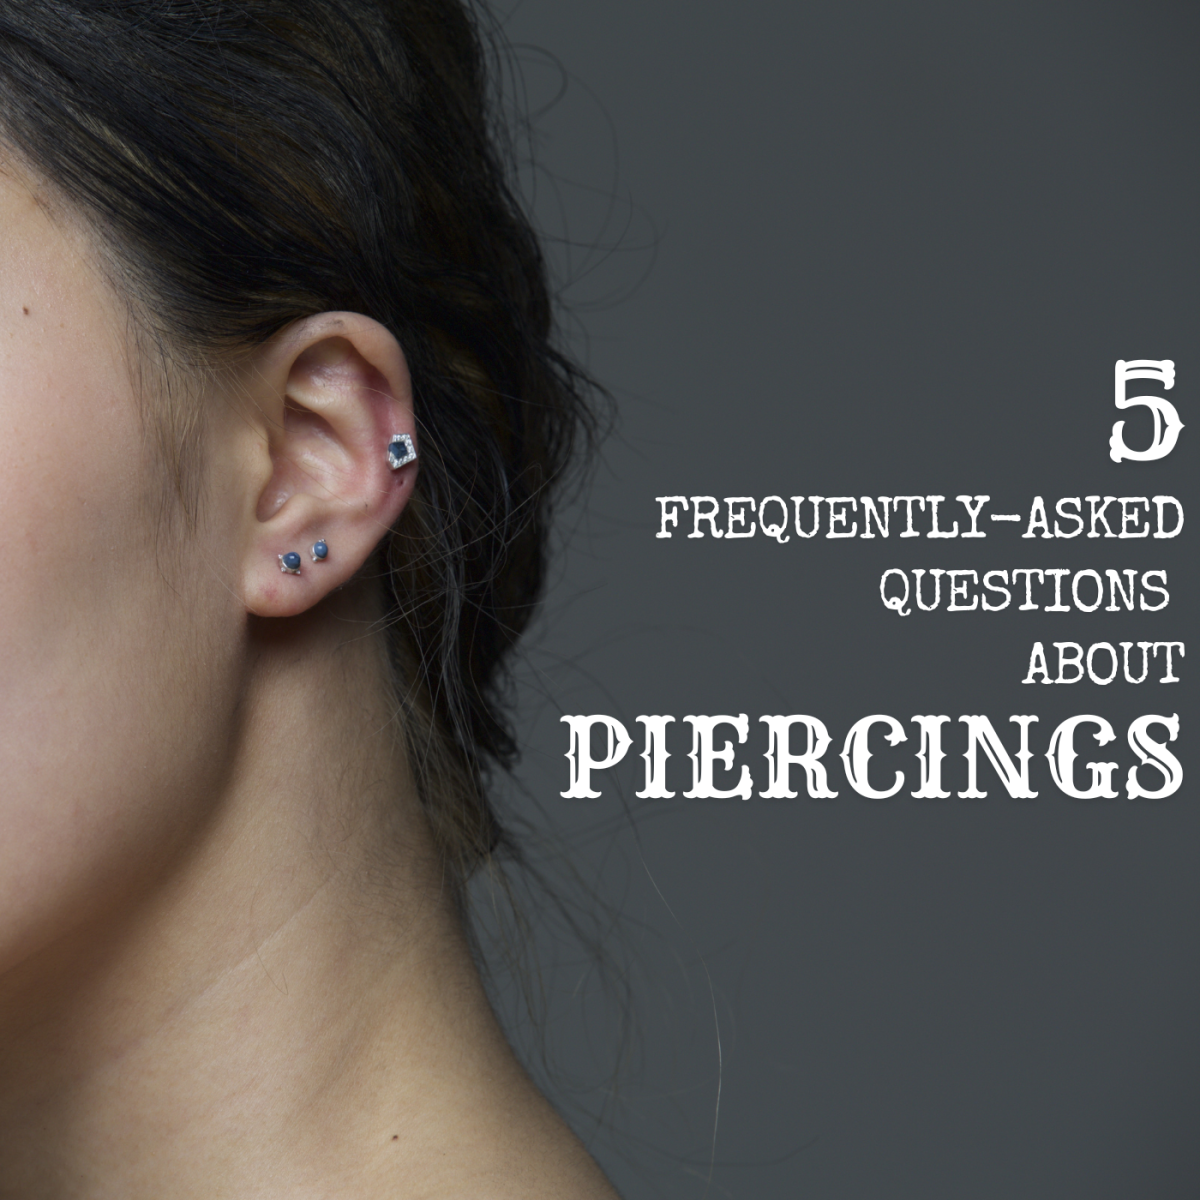 5 Most Frequently Asked Questions About Piercing